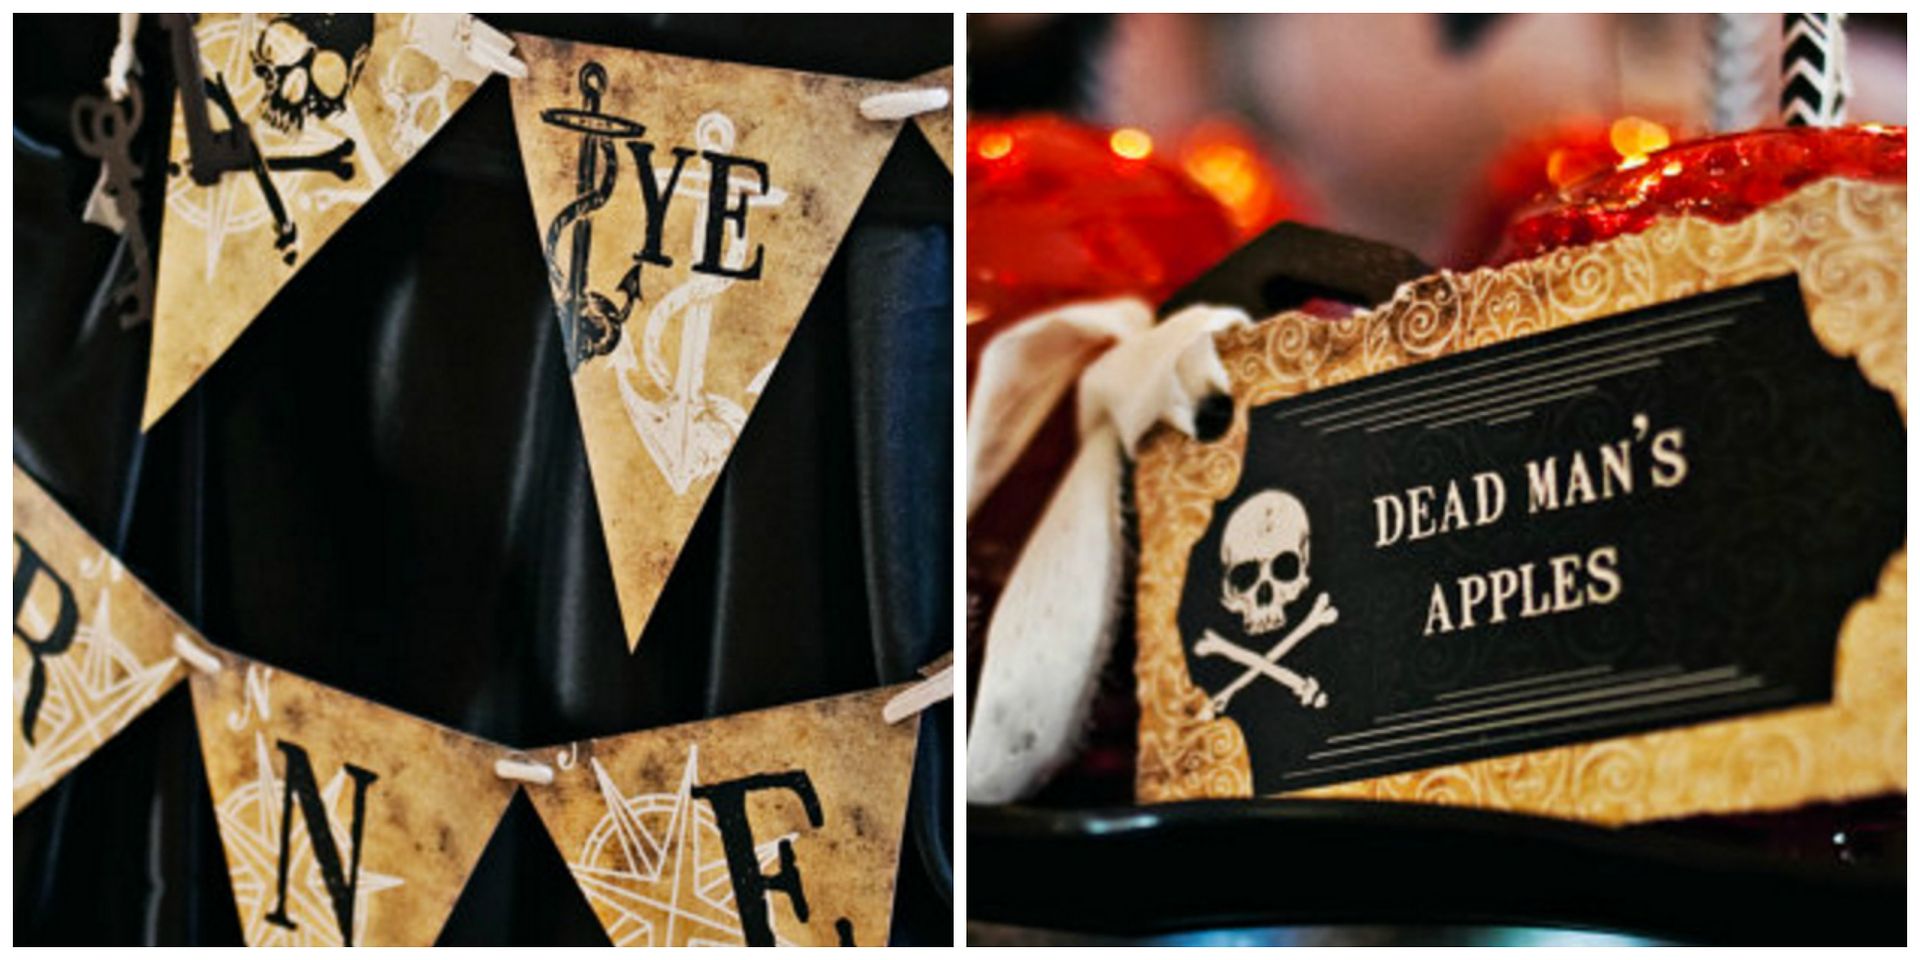 Easy pirate party theme decorations: Check the free downloads from Paper and Cake on Etsy